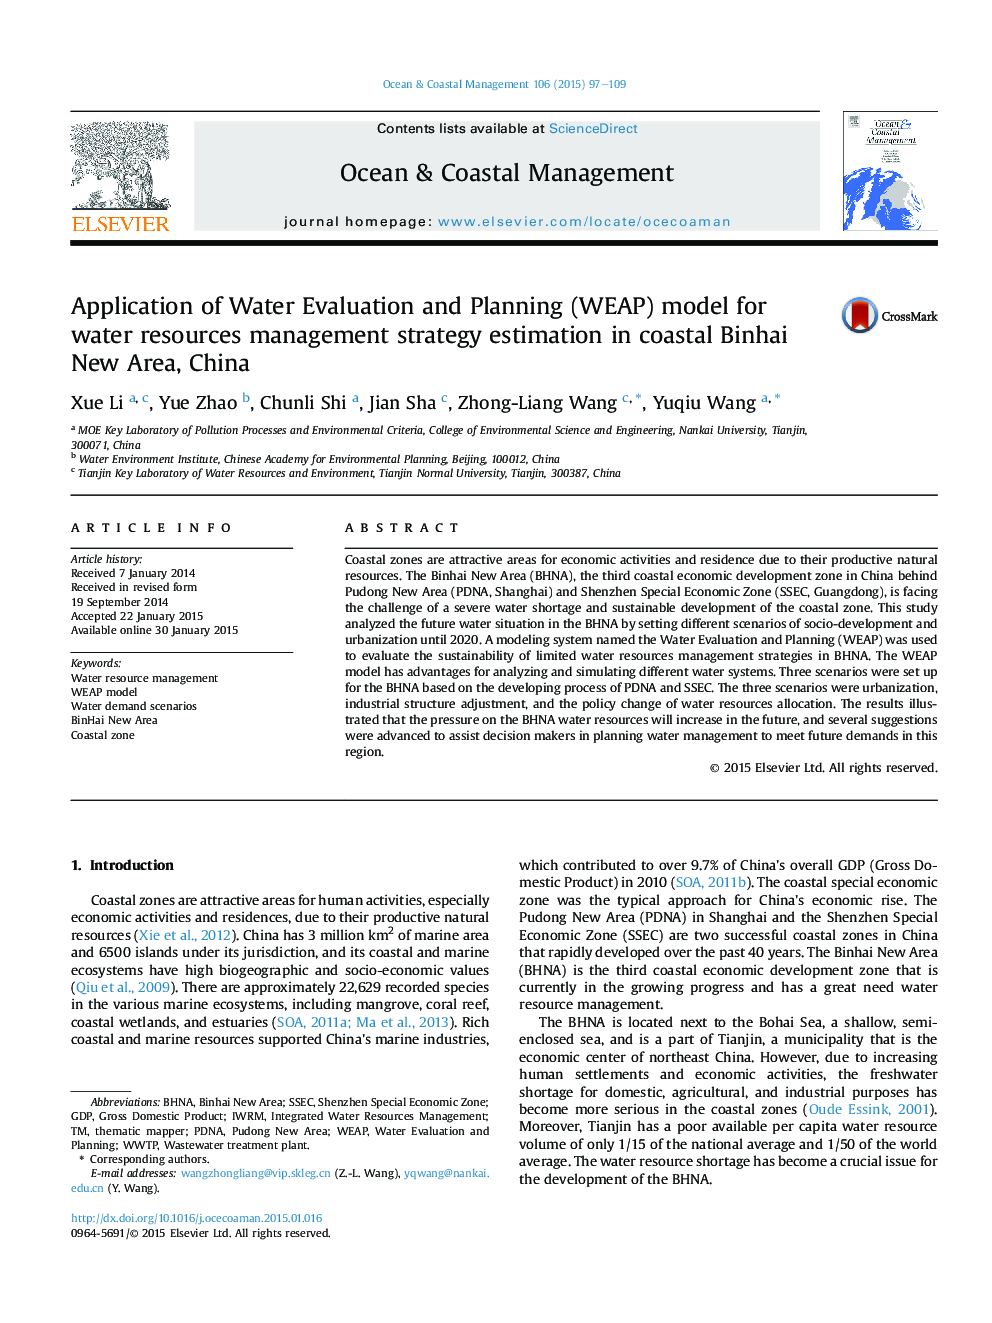 Application of Water Evaluation and Planning (WEAP) model for water resources management strategy estimation in coastal Binhai New Area, China